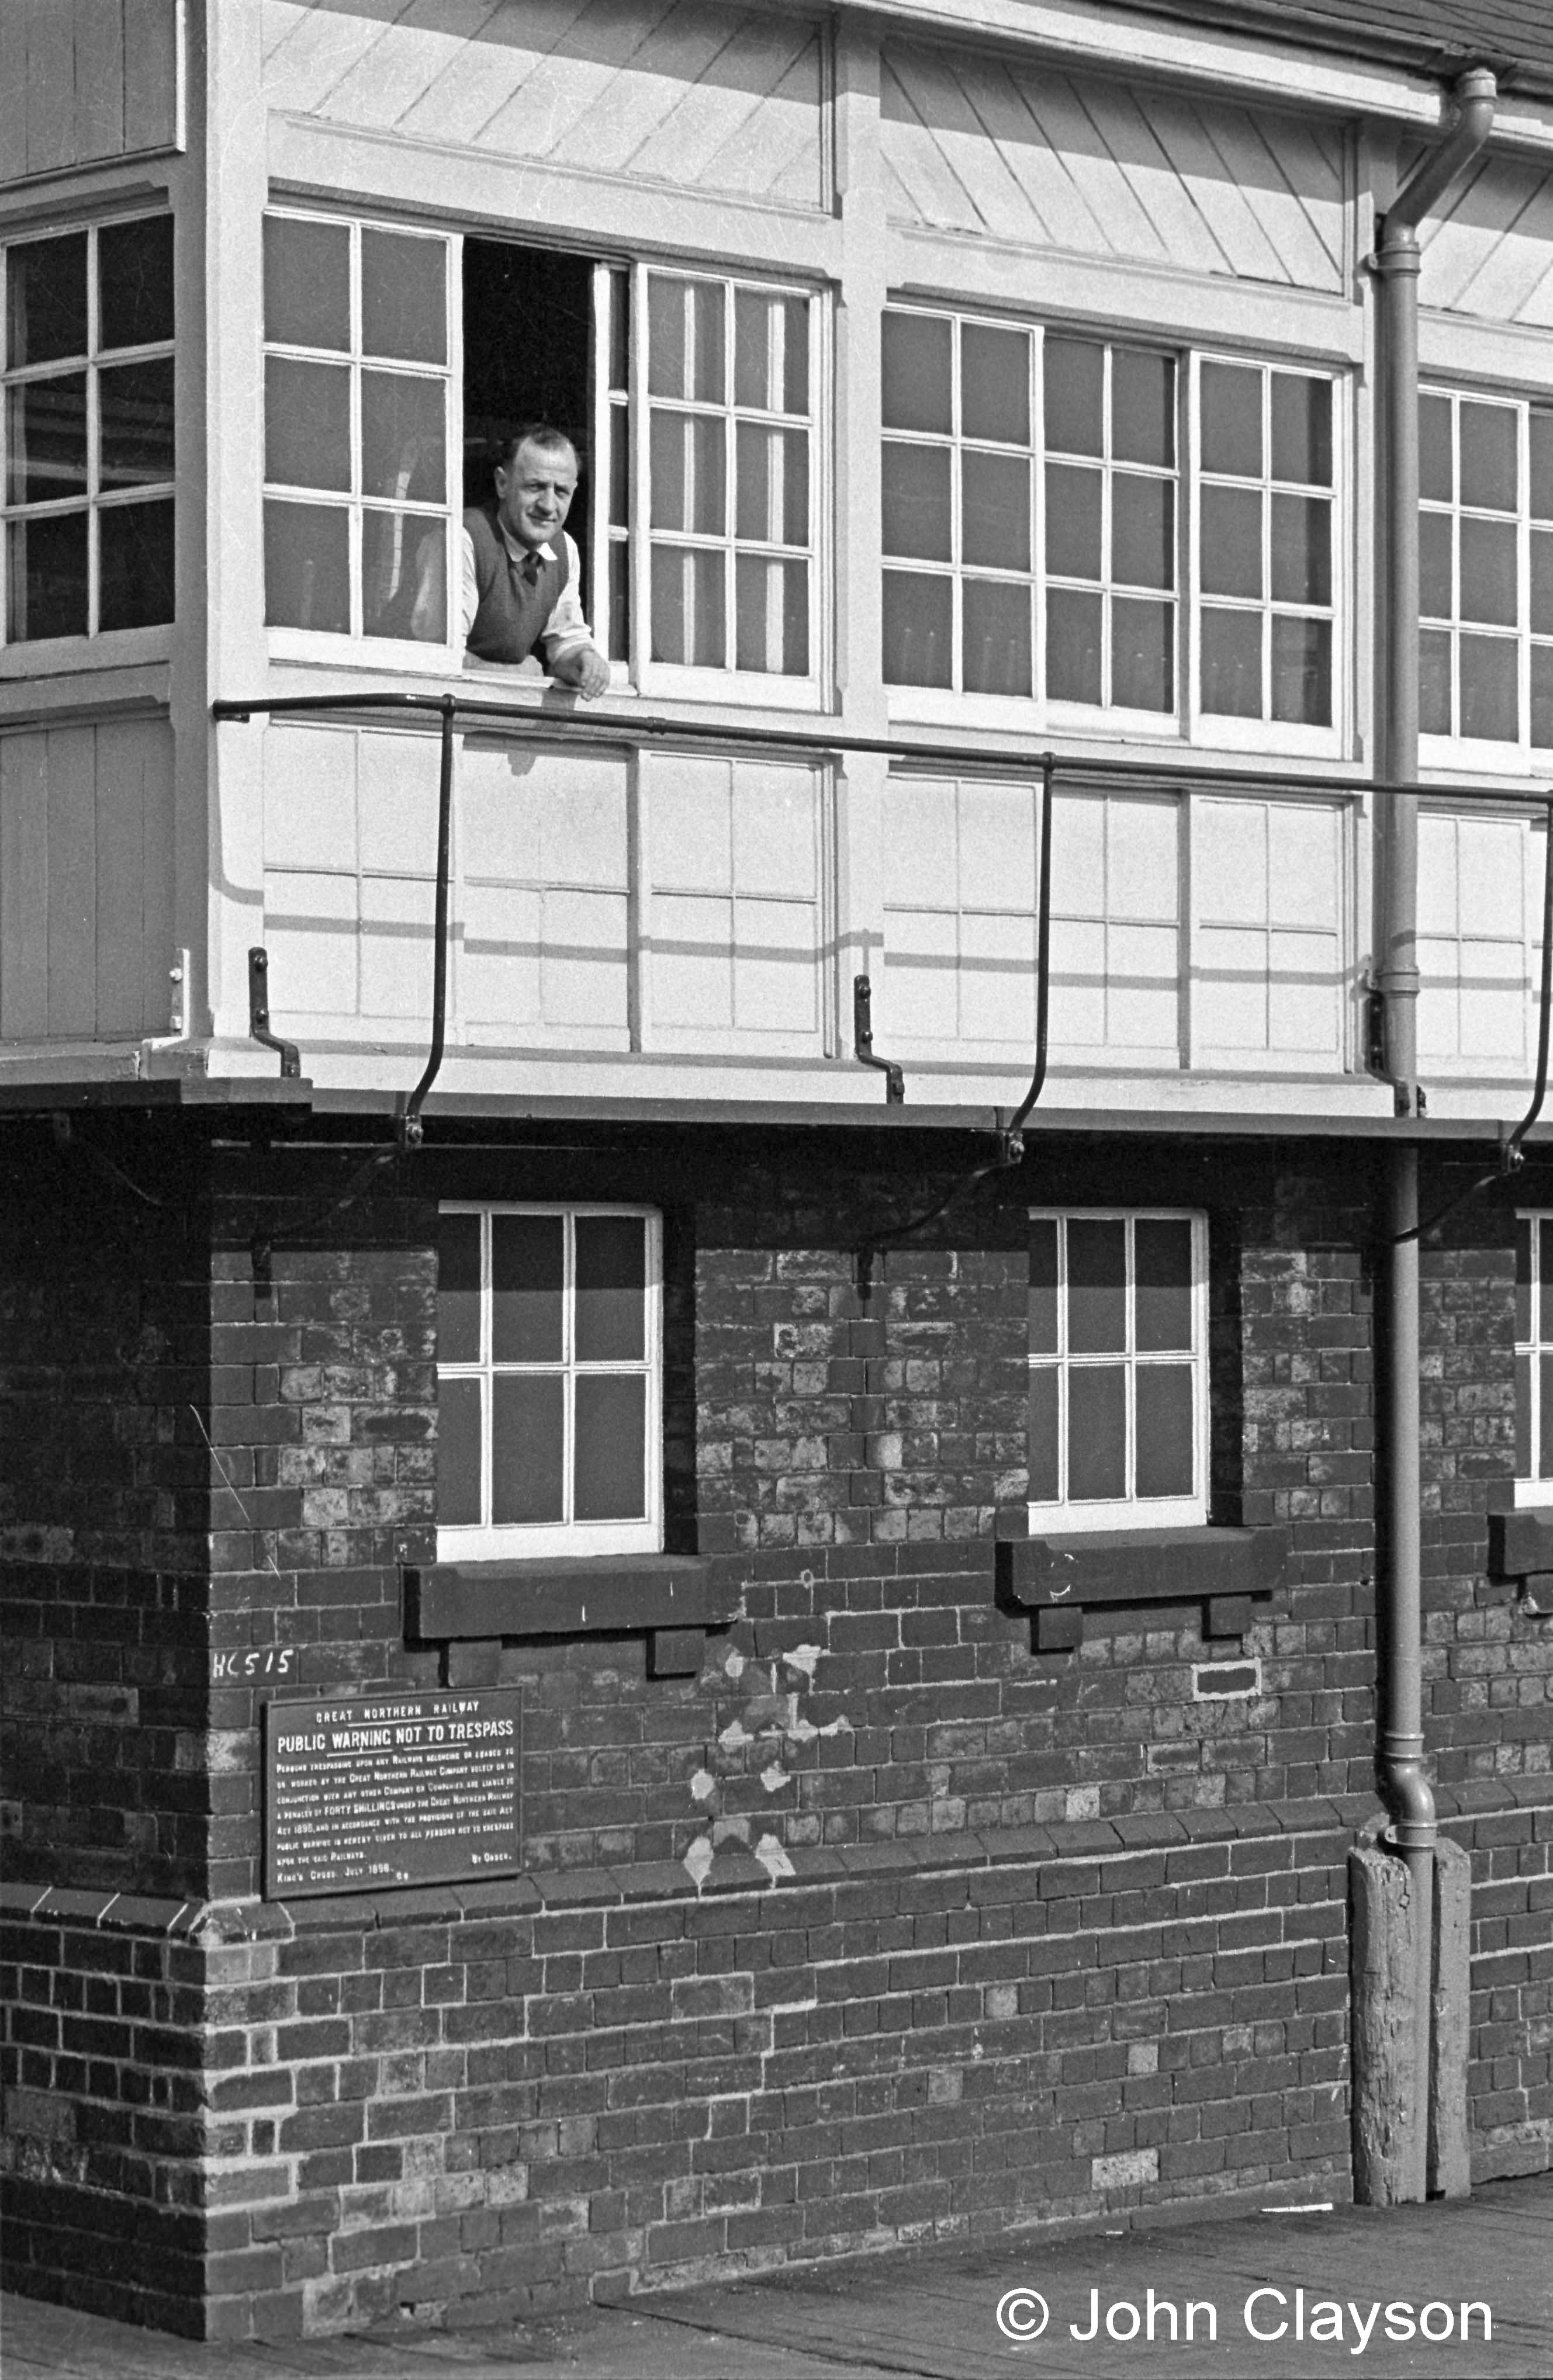 Signalman Jock Drummond is at the window of the Yard Box on 5th September 1963, a fine autumn day. From within you might hear the 'ting' or 'tang' of a block bell, announcing the approach of another train on the main line. What will it be? If you've learned the block signalling bell code you may be able to work it out! Photograph by Cedric A. Clayson.